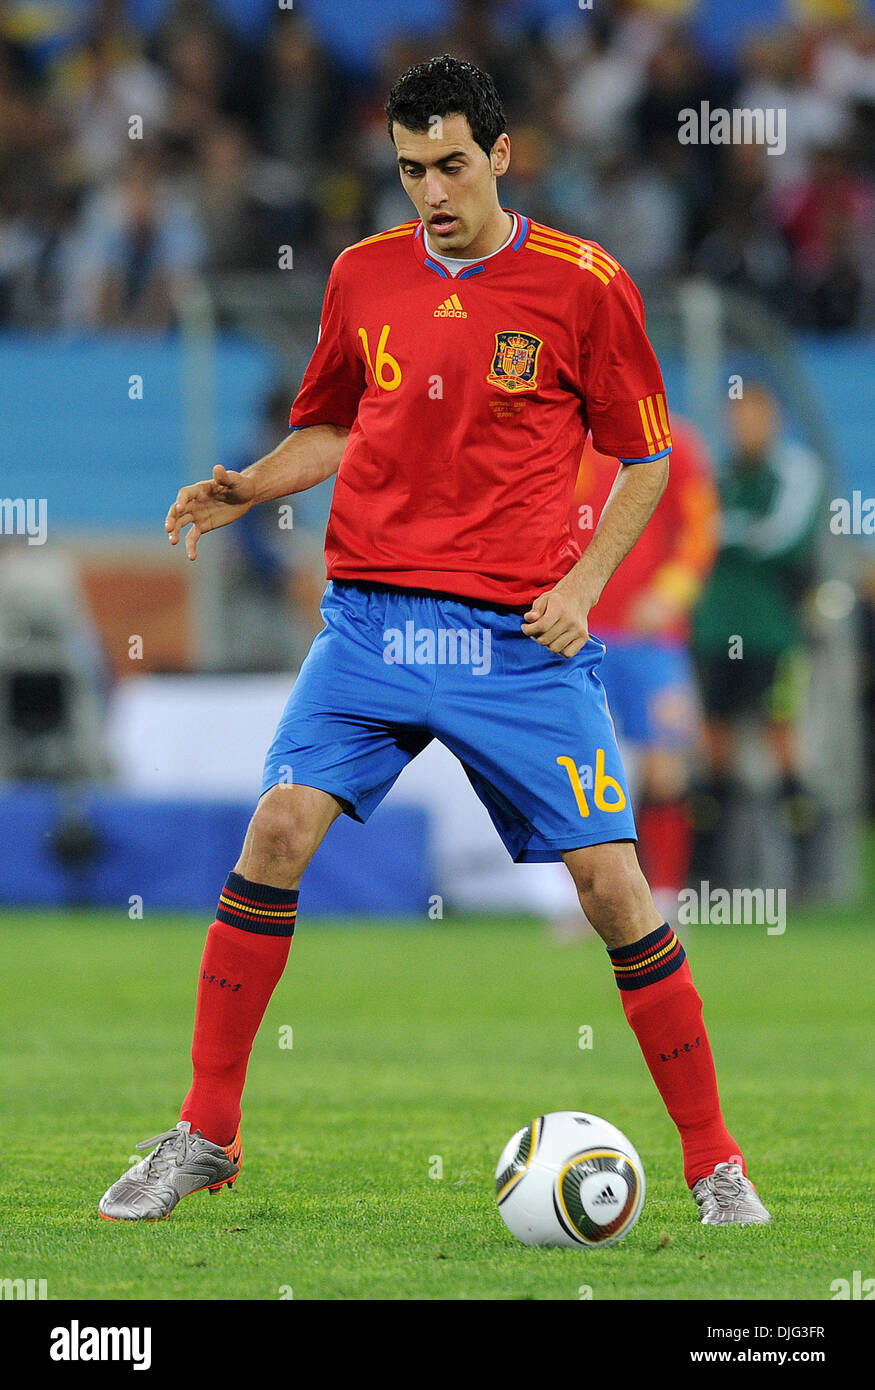 July 07, 2010 - Durban, South Africa - Sergio Busquets of Spain in action during the 2010 FIFA World Cup Semi Final soccer match between Germany and Spain at Princess Magogo Stadium on July 7, 2010 in Durban, South Africa. (Credit Image: © Luca Ghidoni/ZUMApress.com) Stock Photo